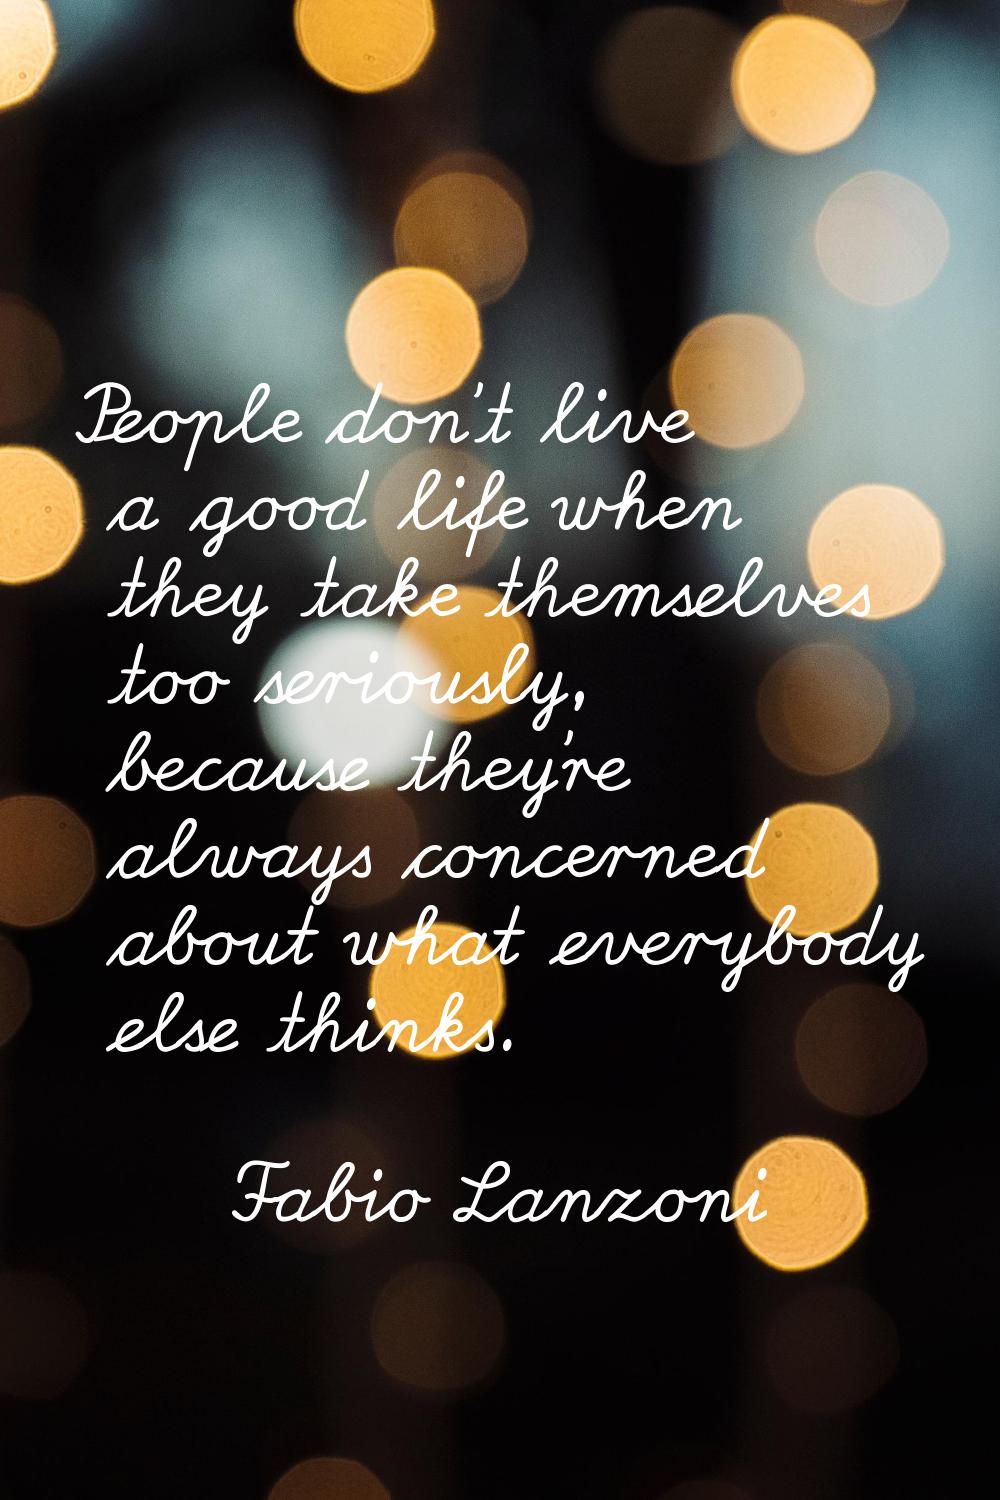 People don't live a good life when they take themselves too seriously, because they're always conce